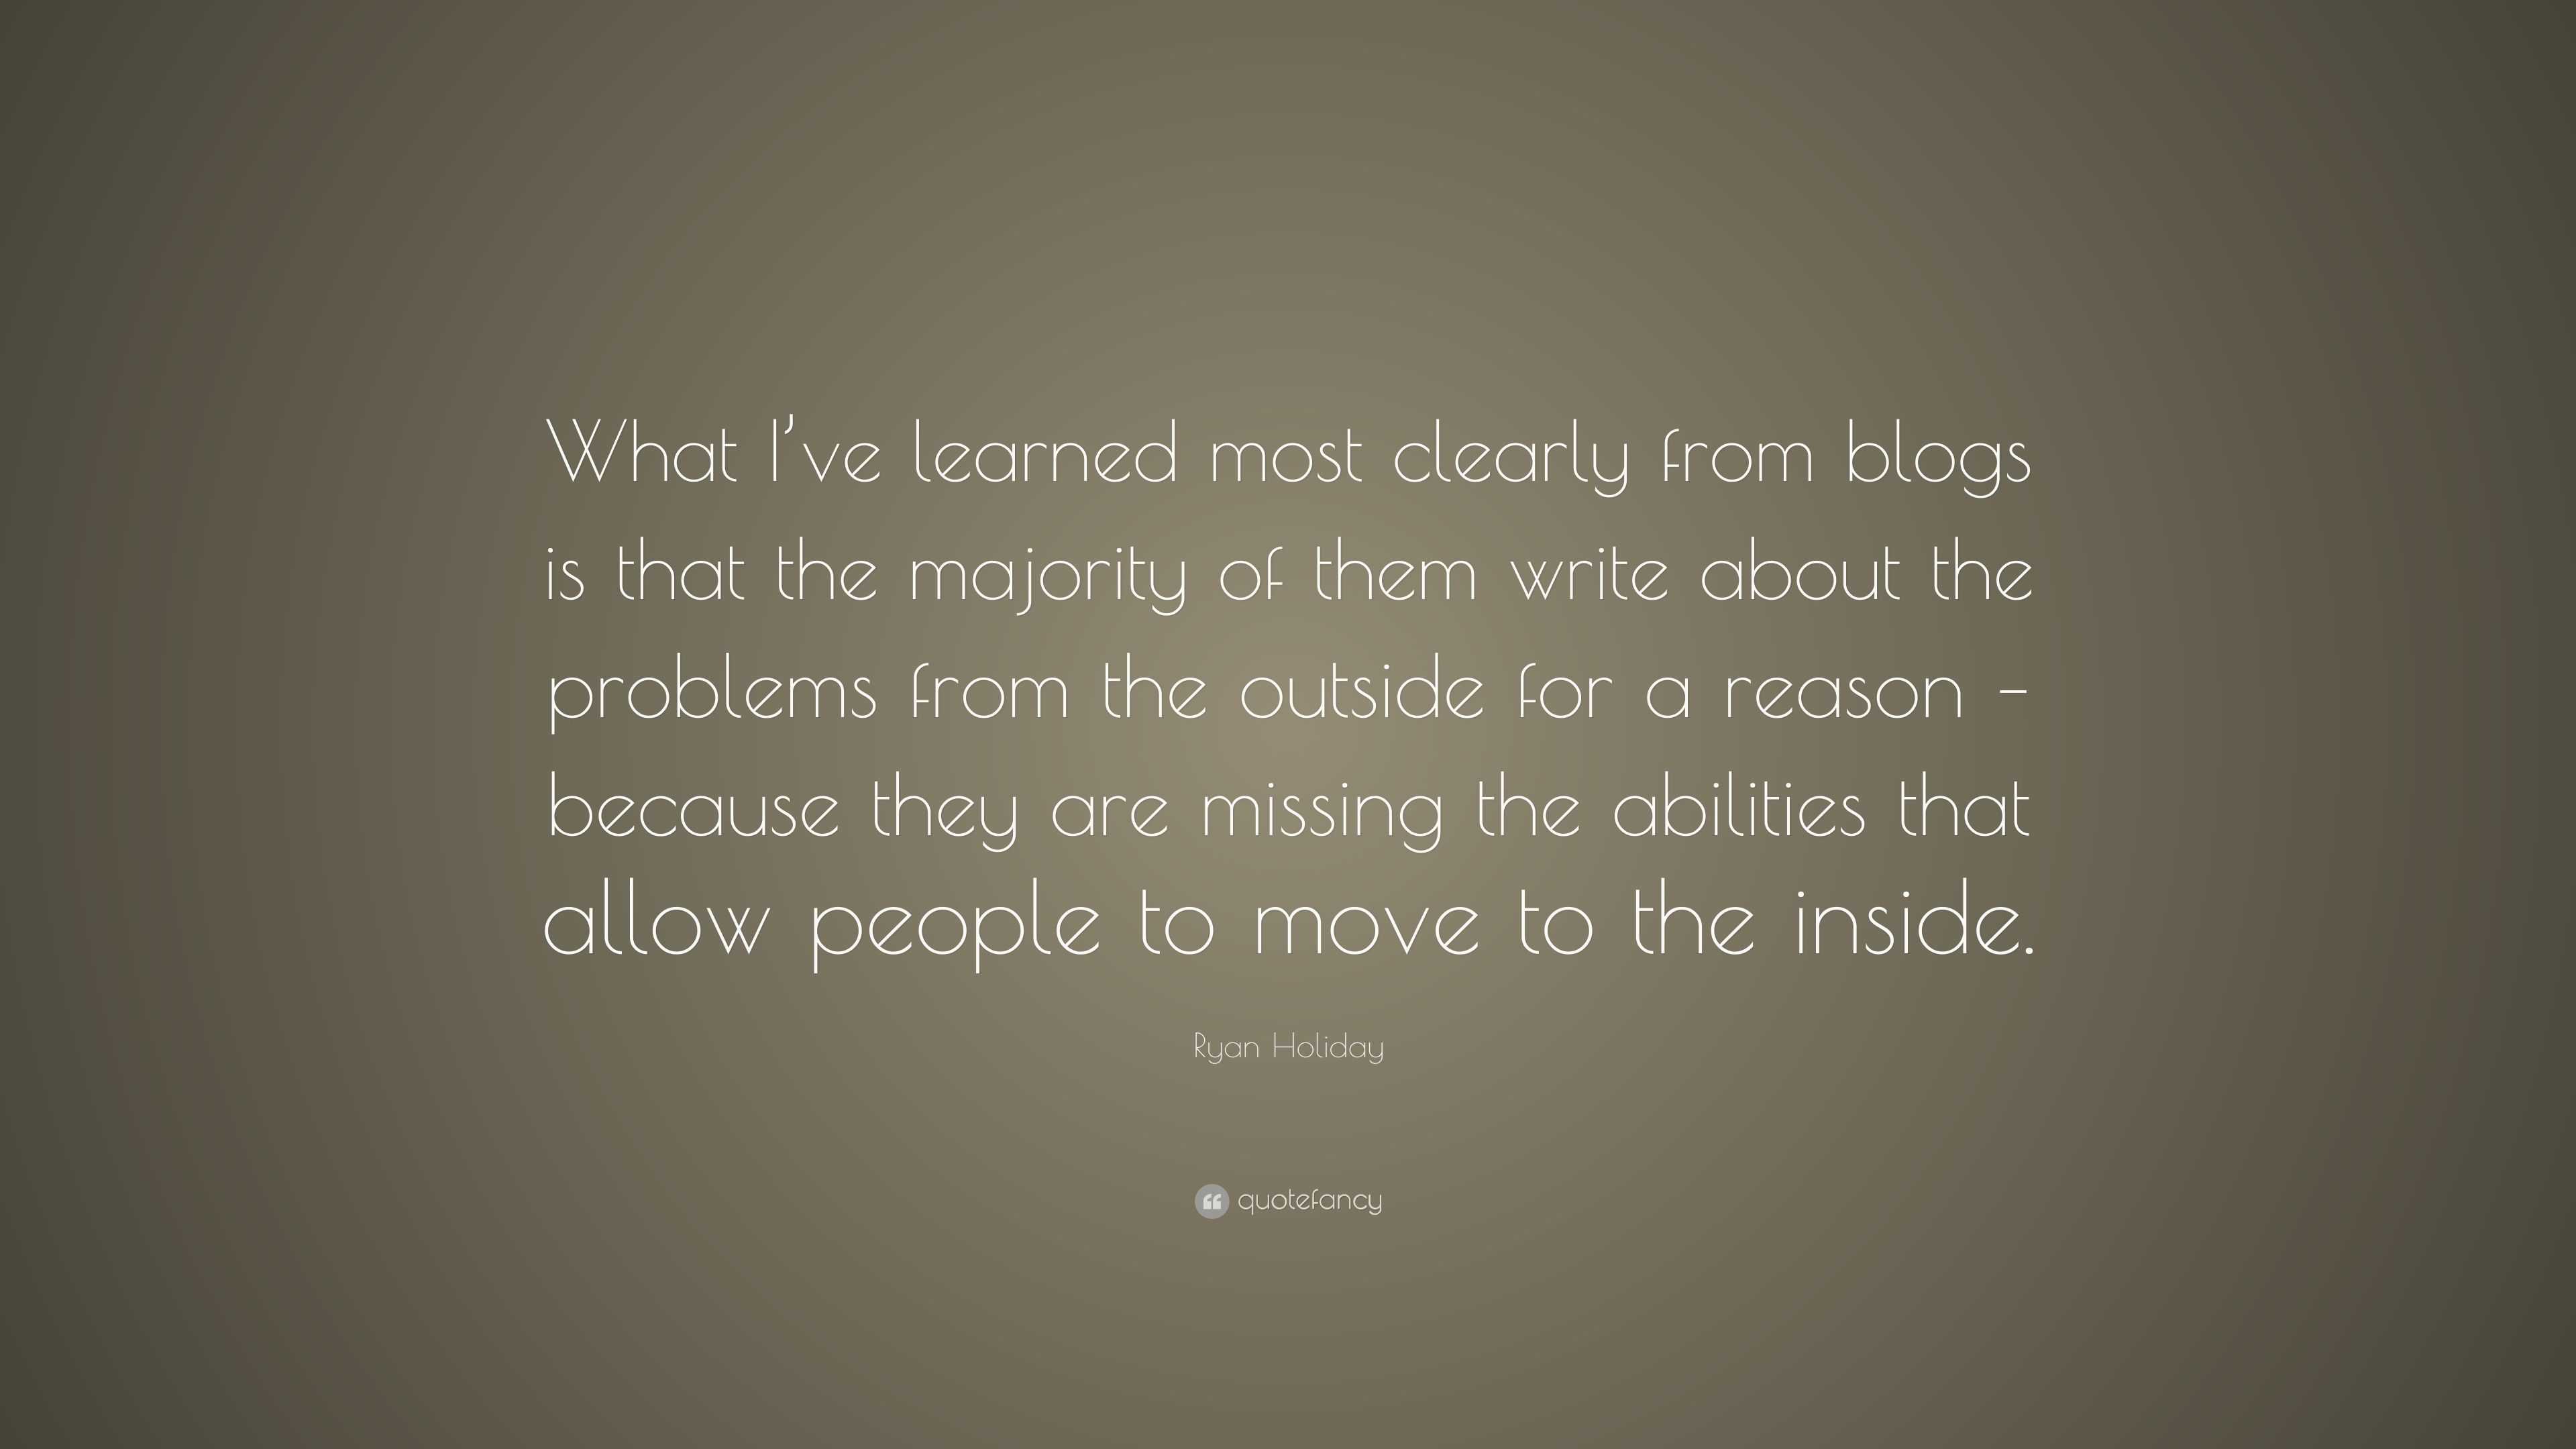 Ryan Holiday Quote: “What I’ve learned most clearly from blogs is that